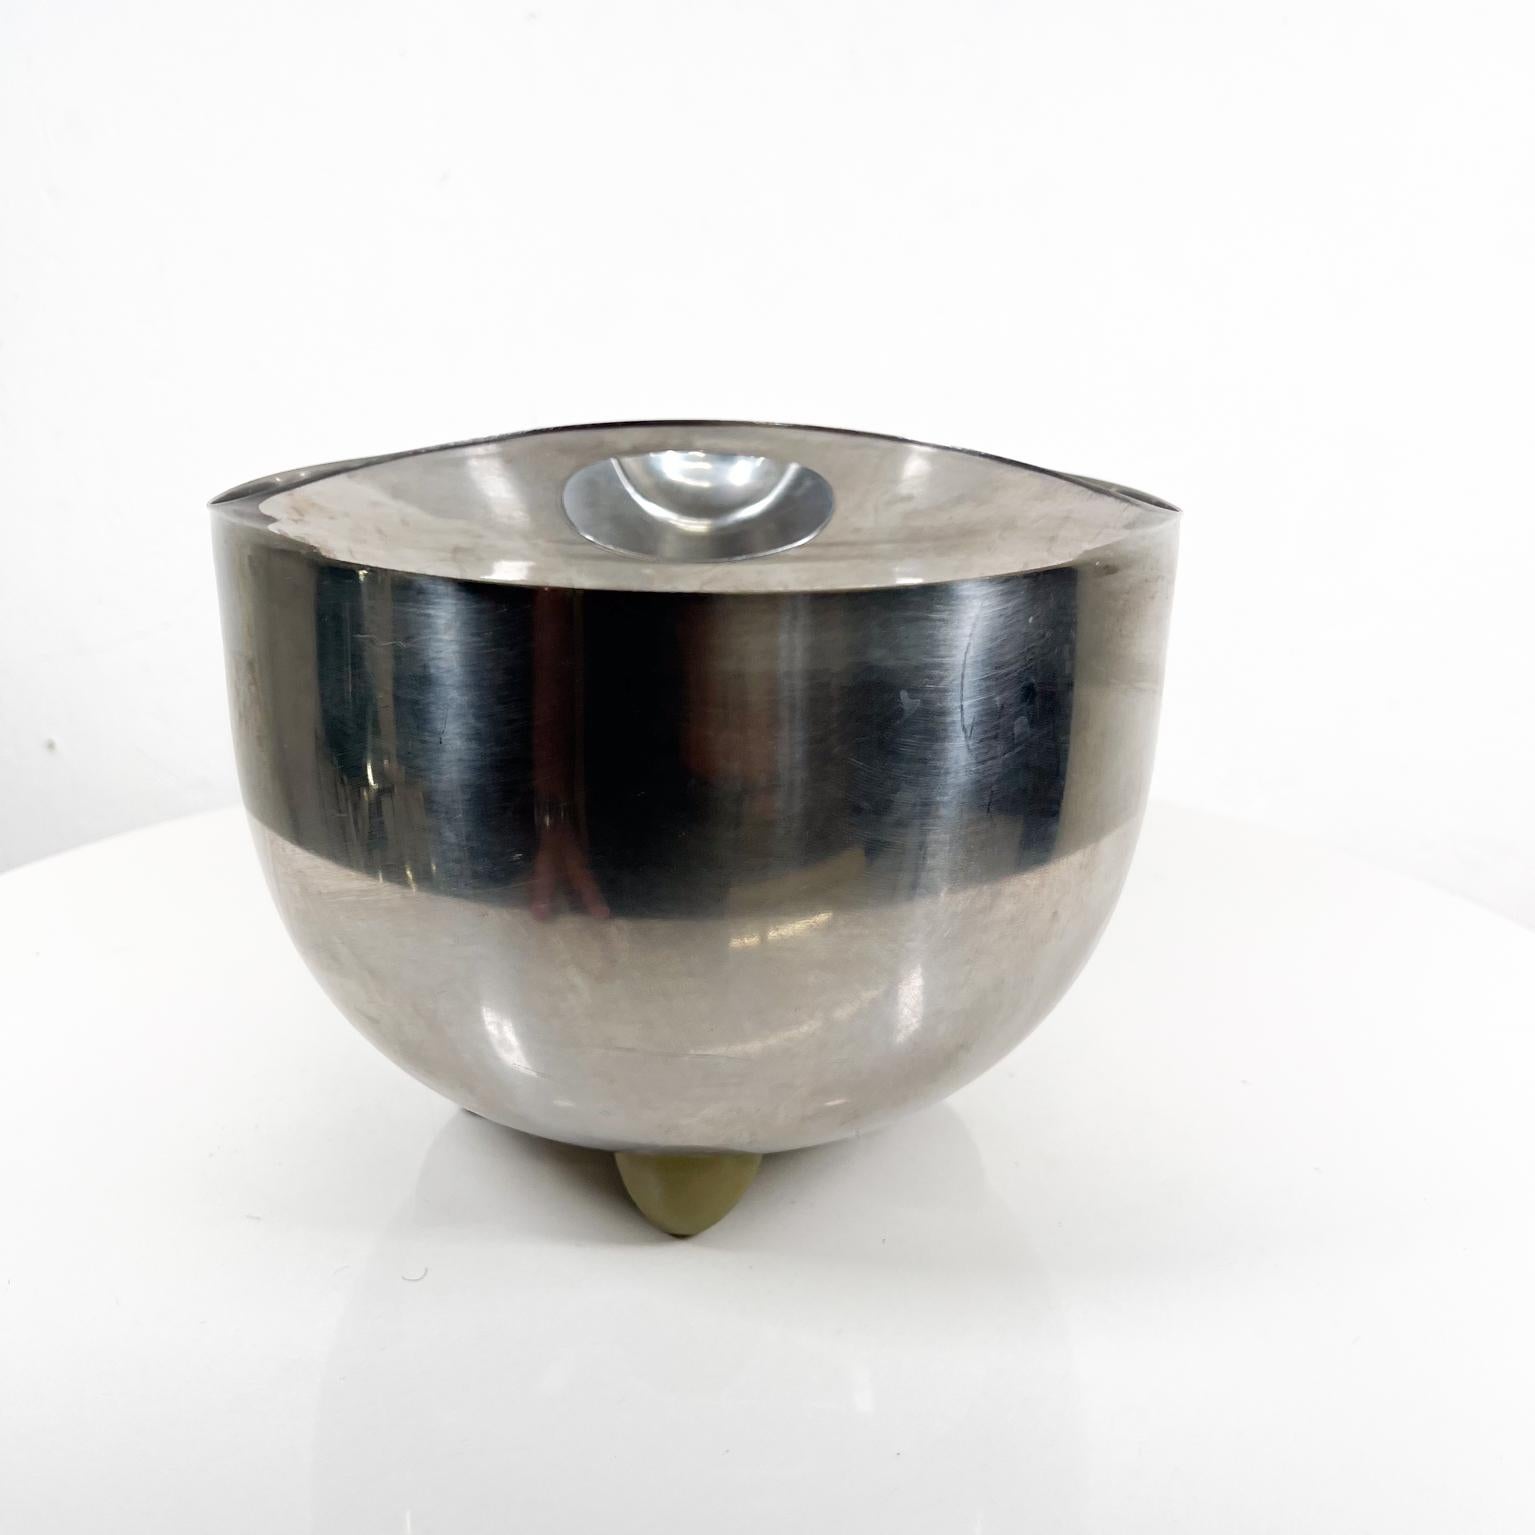 1985 Michael Graves Design Stainless Steel Footed Mixing Bowl In Good Condition For Sale In Chula Vista, CA